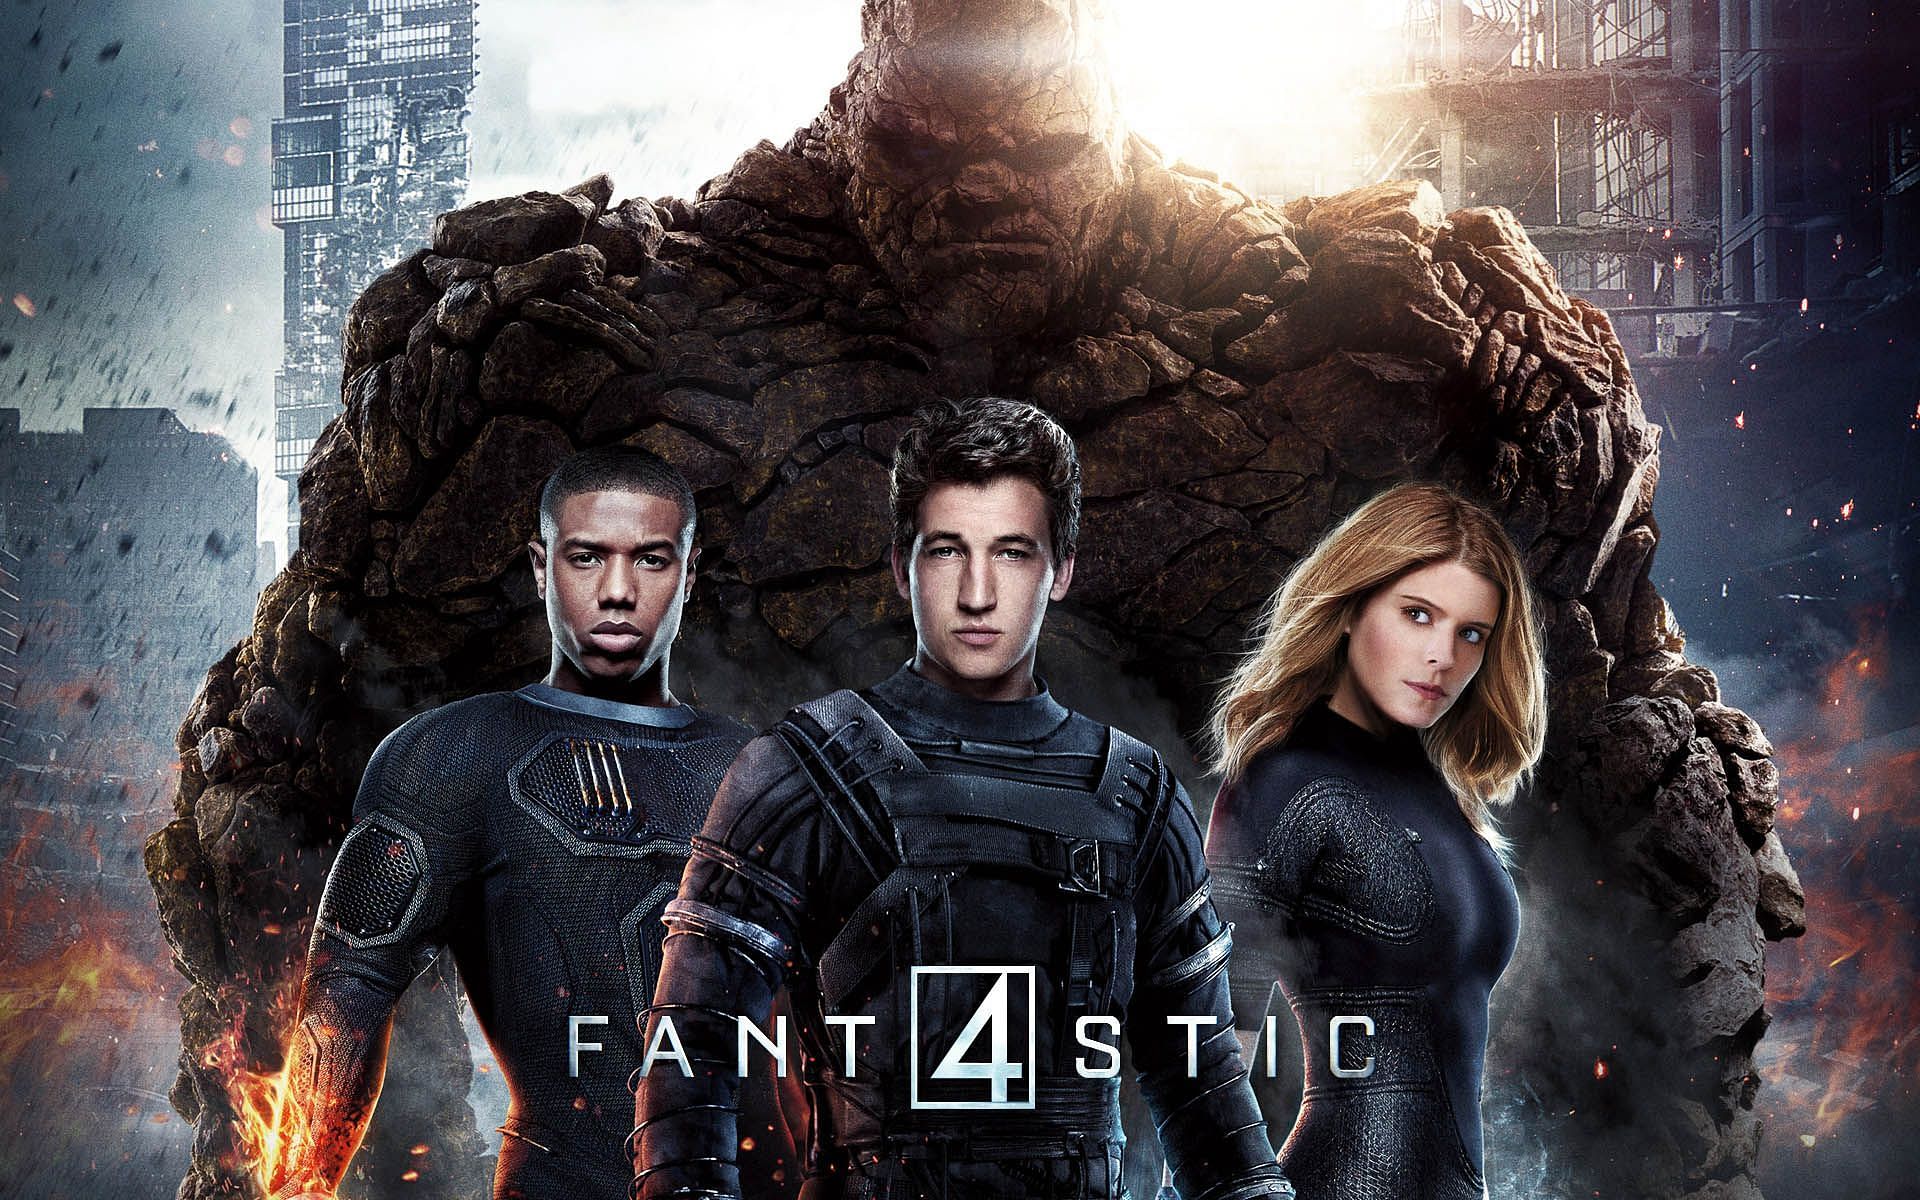 The Fantastic Four 2015 faced a lot of criticism and negative feedback, but was it really justified? (Image via 20th Century Fox)